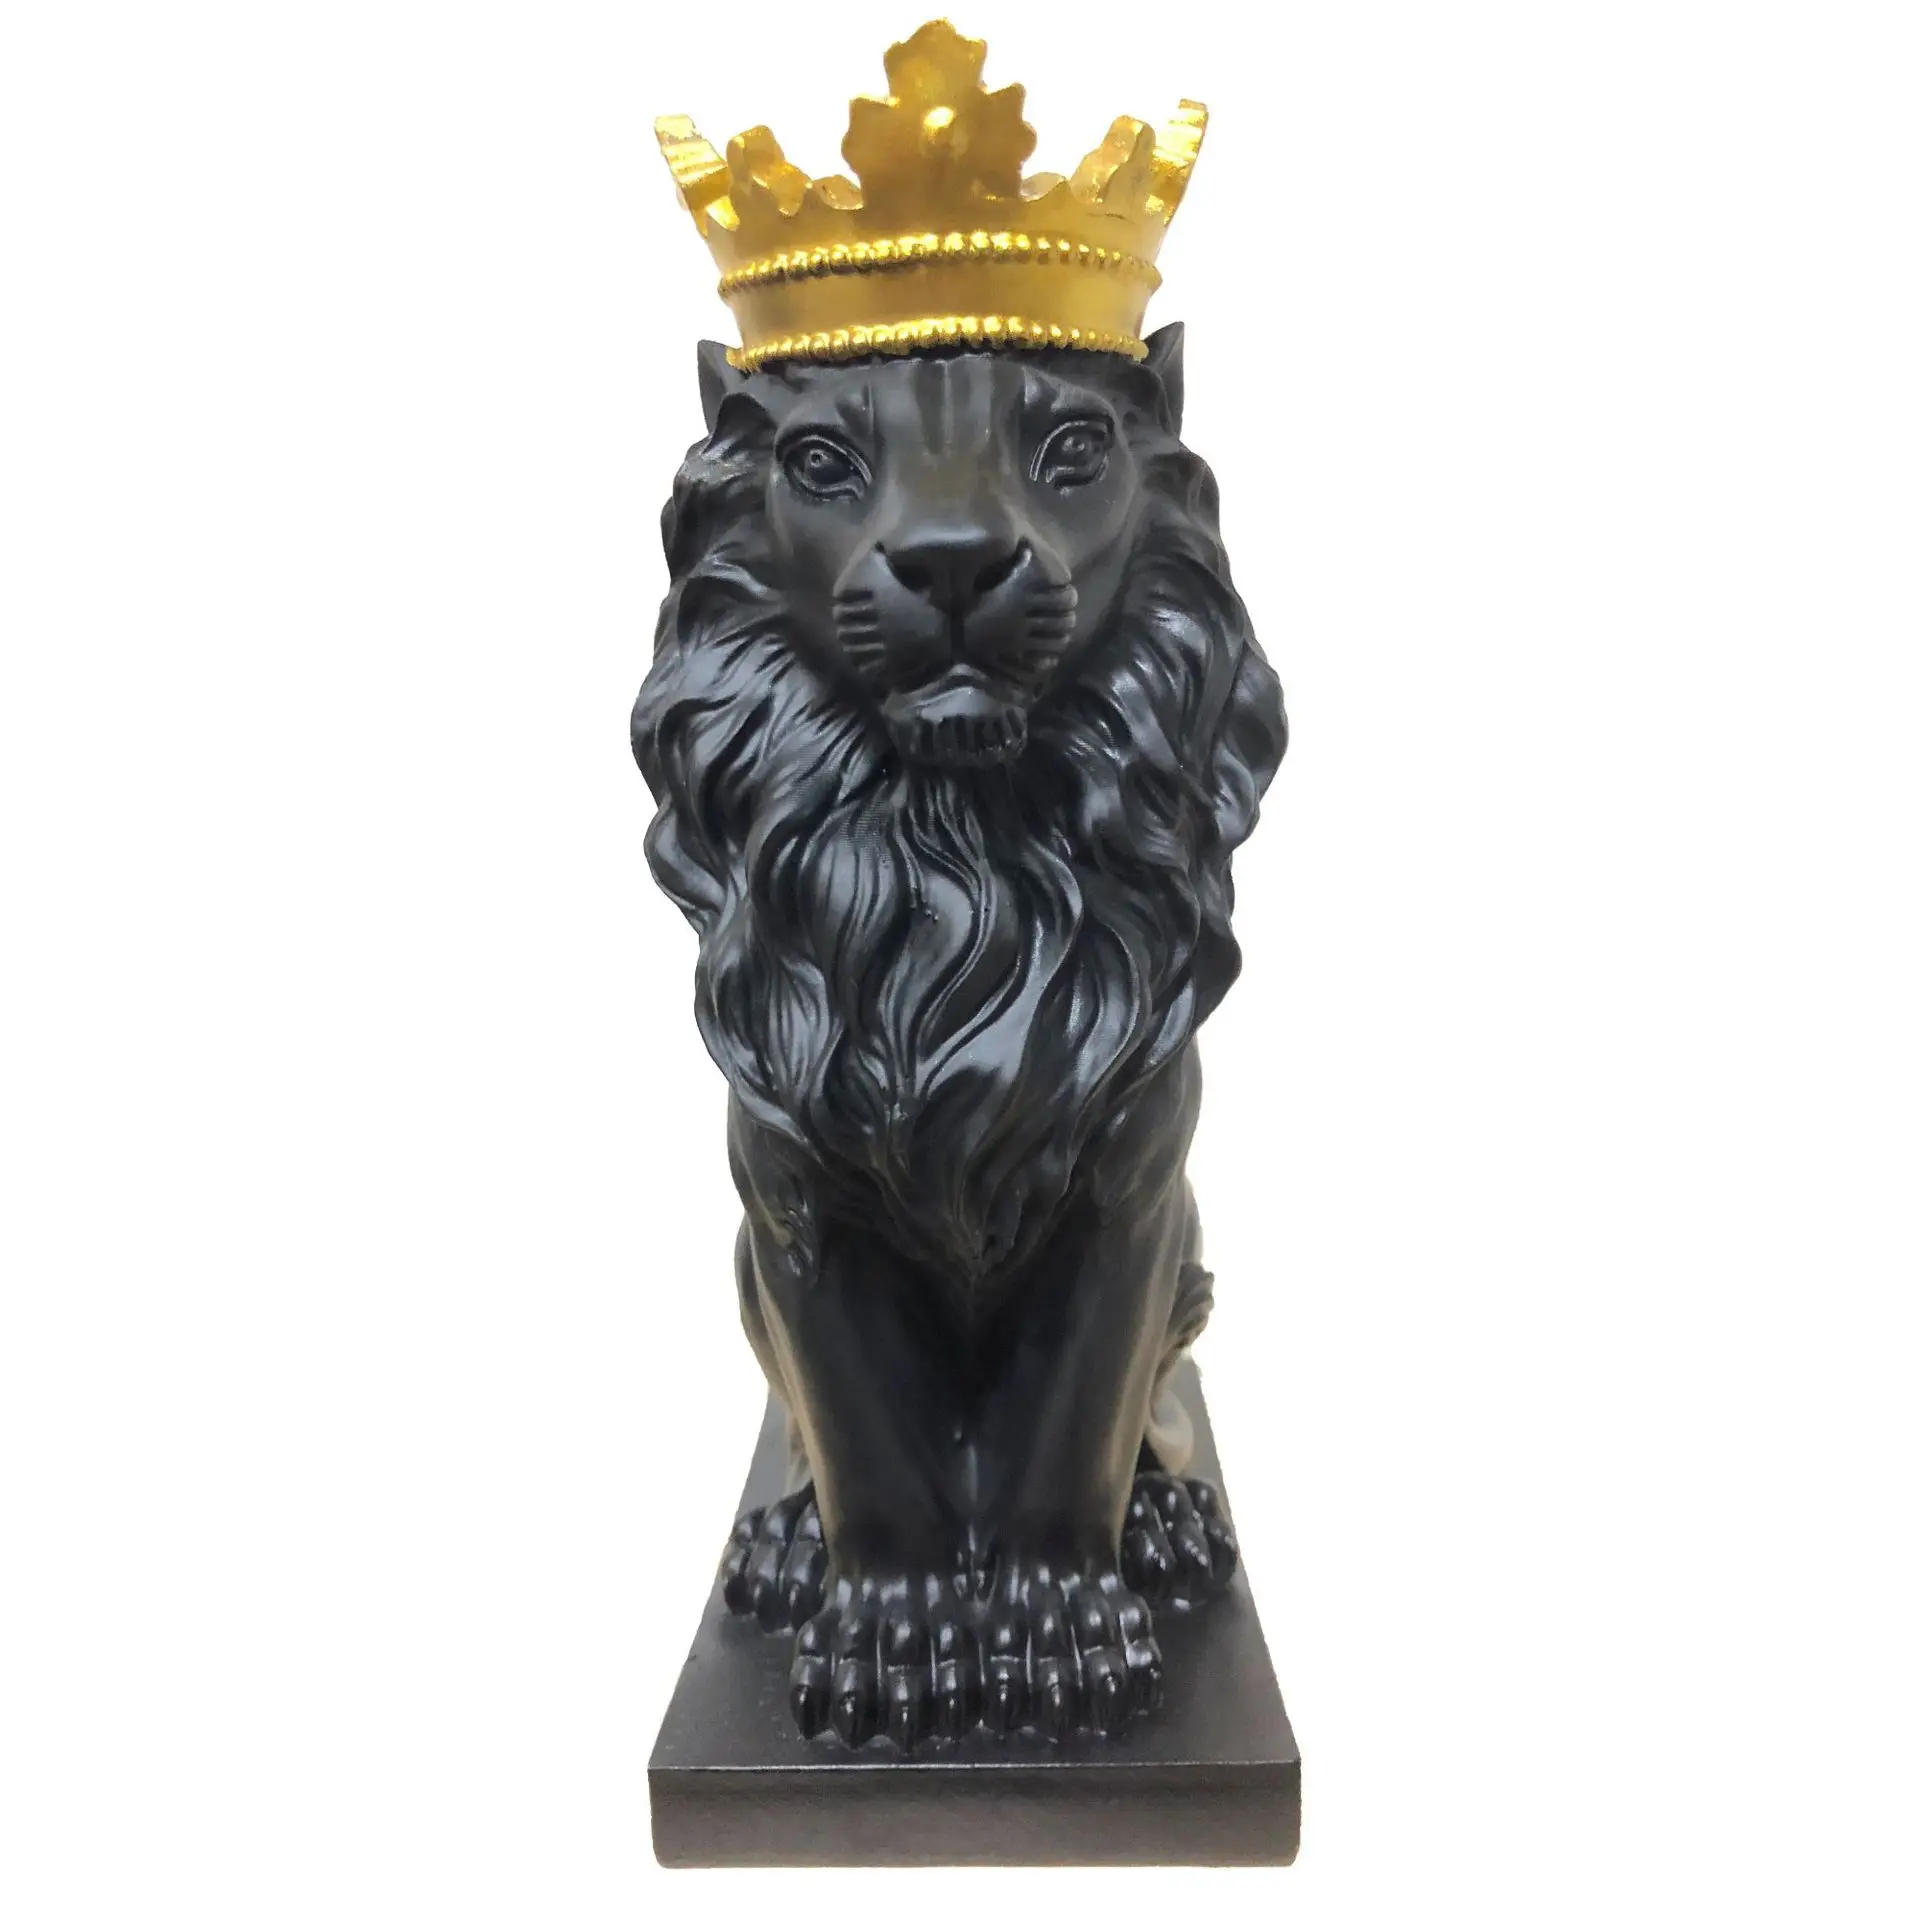 Details about   Lion Statues For Decoration Nordic Resin Figurine/Sculpture Model Animal 